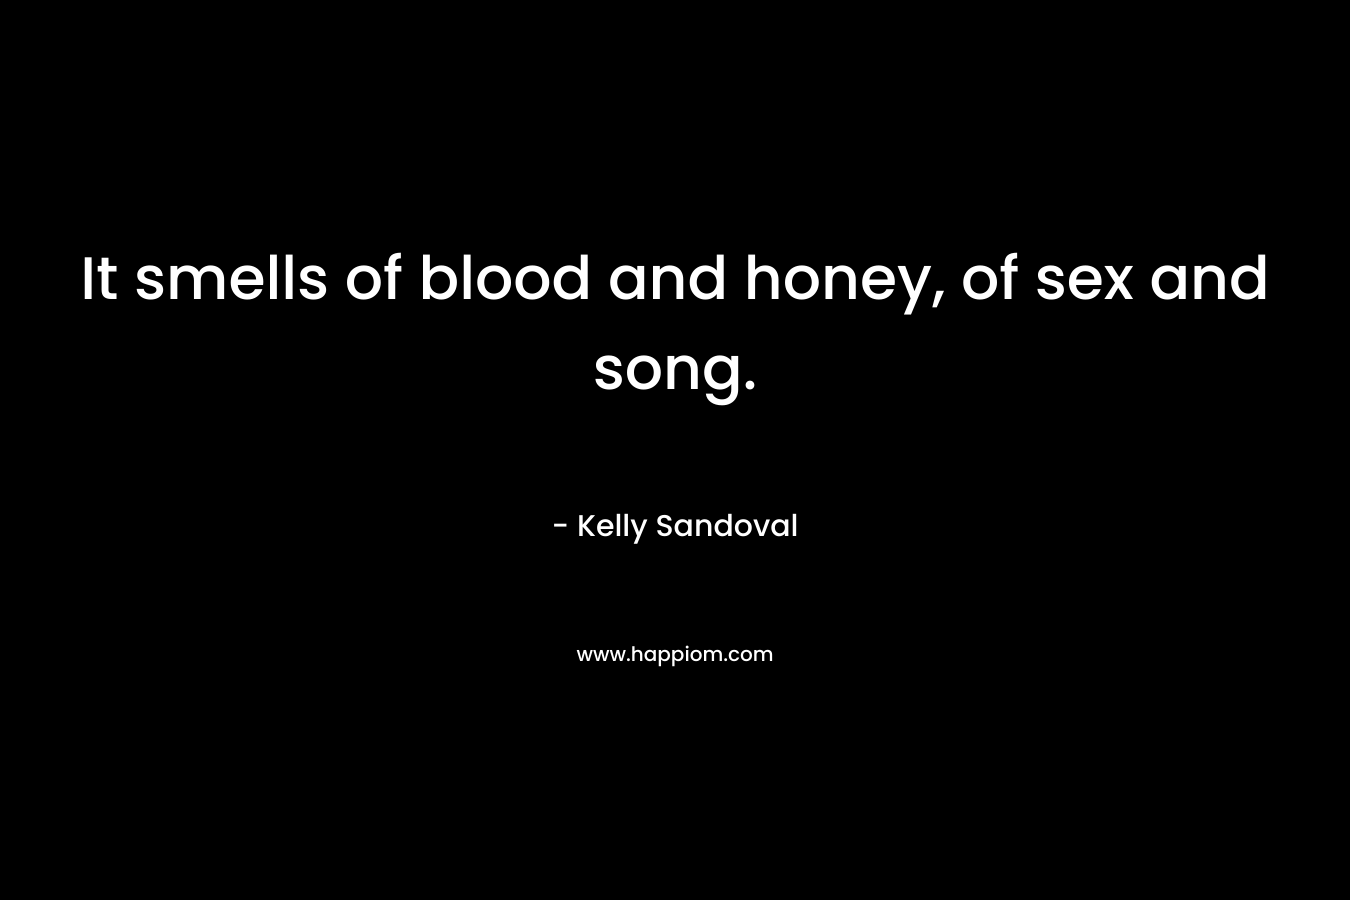 It smells of blood and honey, of sex and song. – Kelly Sandoval